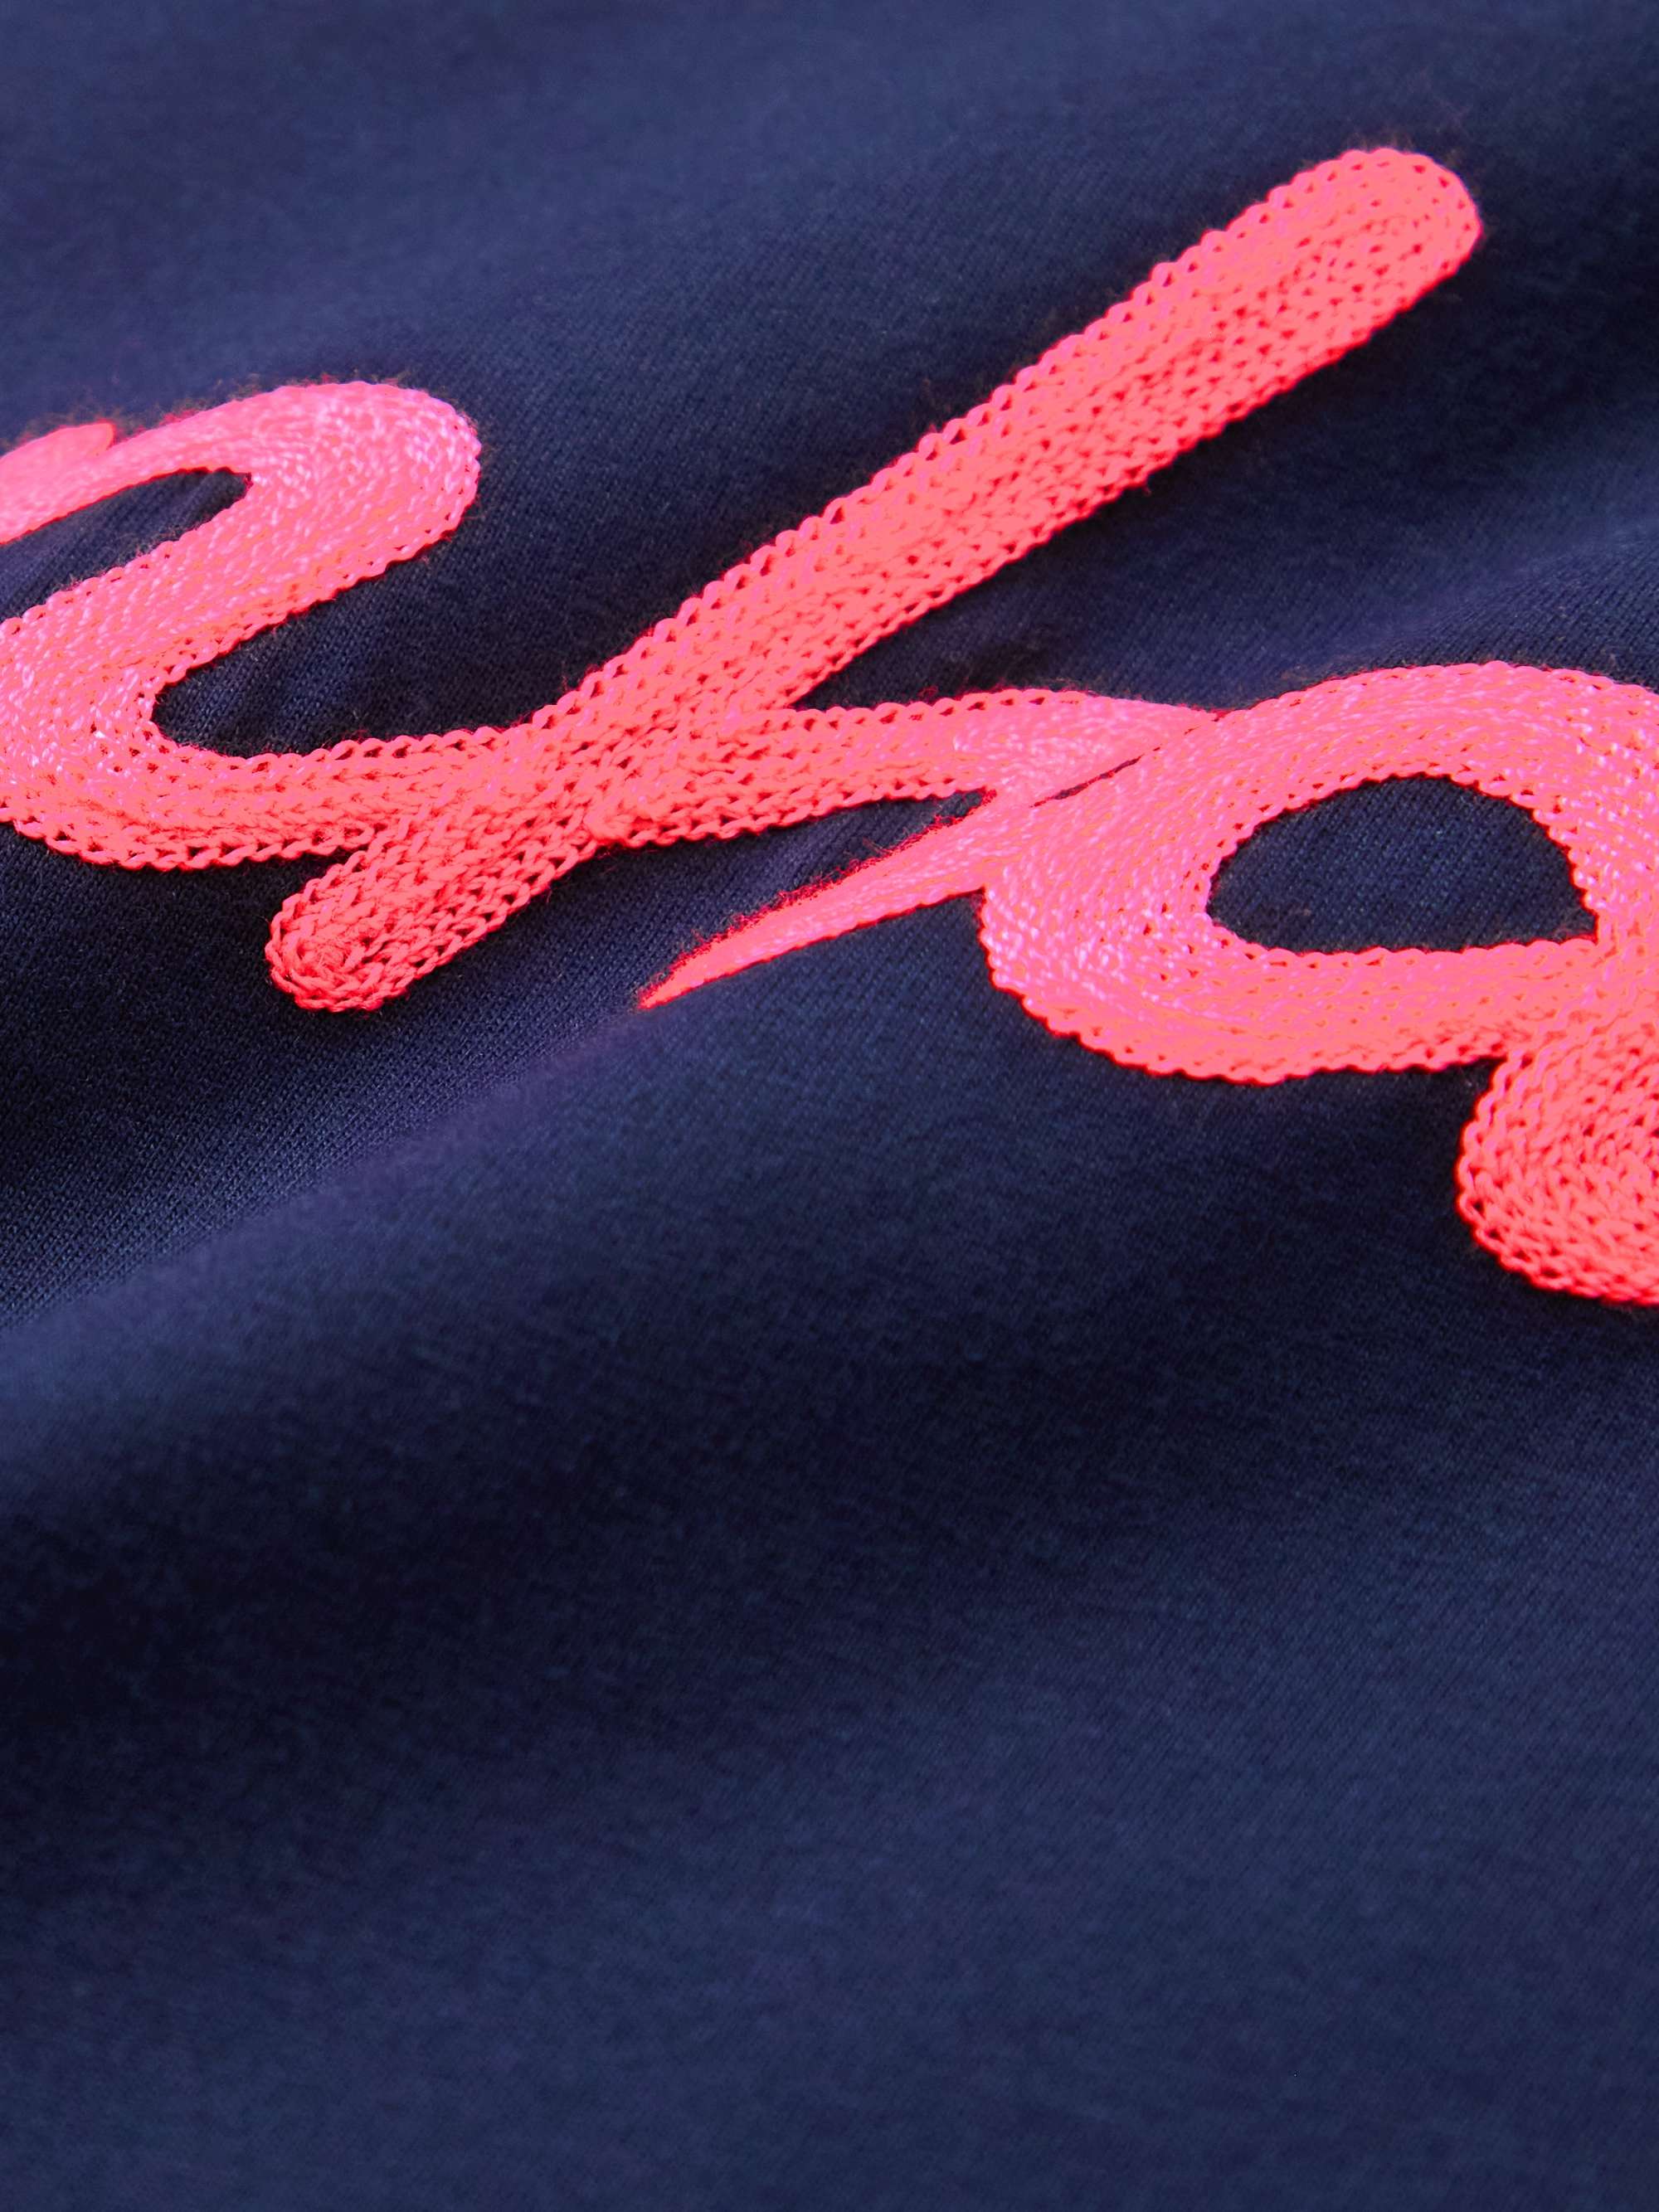 RAPHA Logo-Embroidered Cotton-Jersey T-Shirt